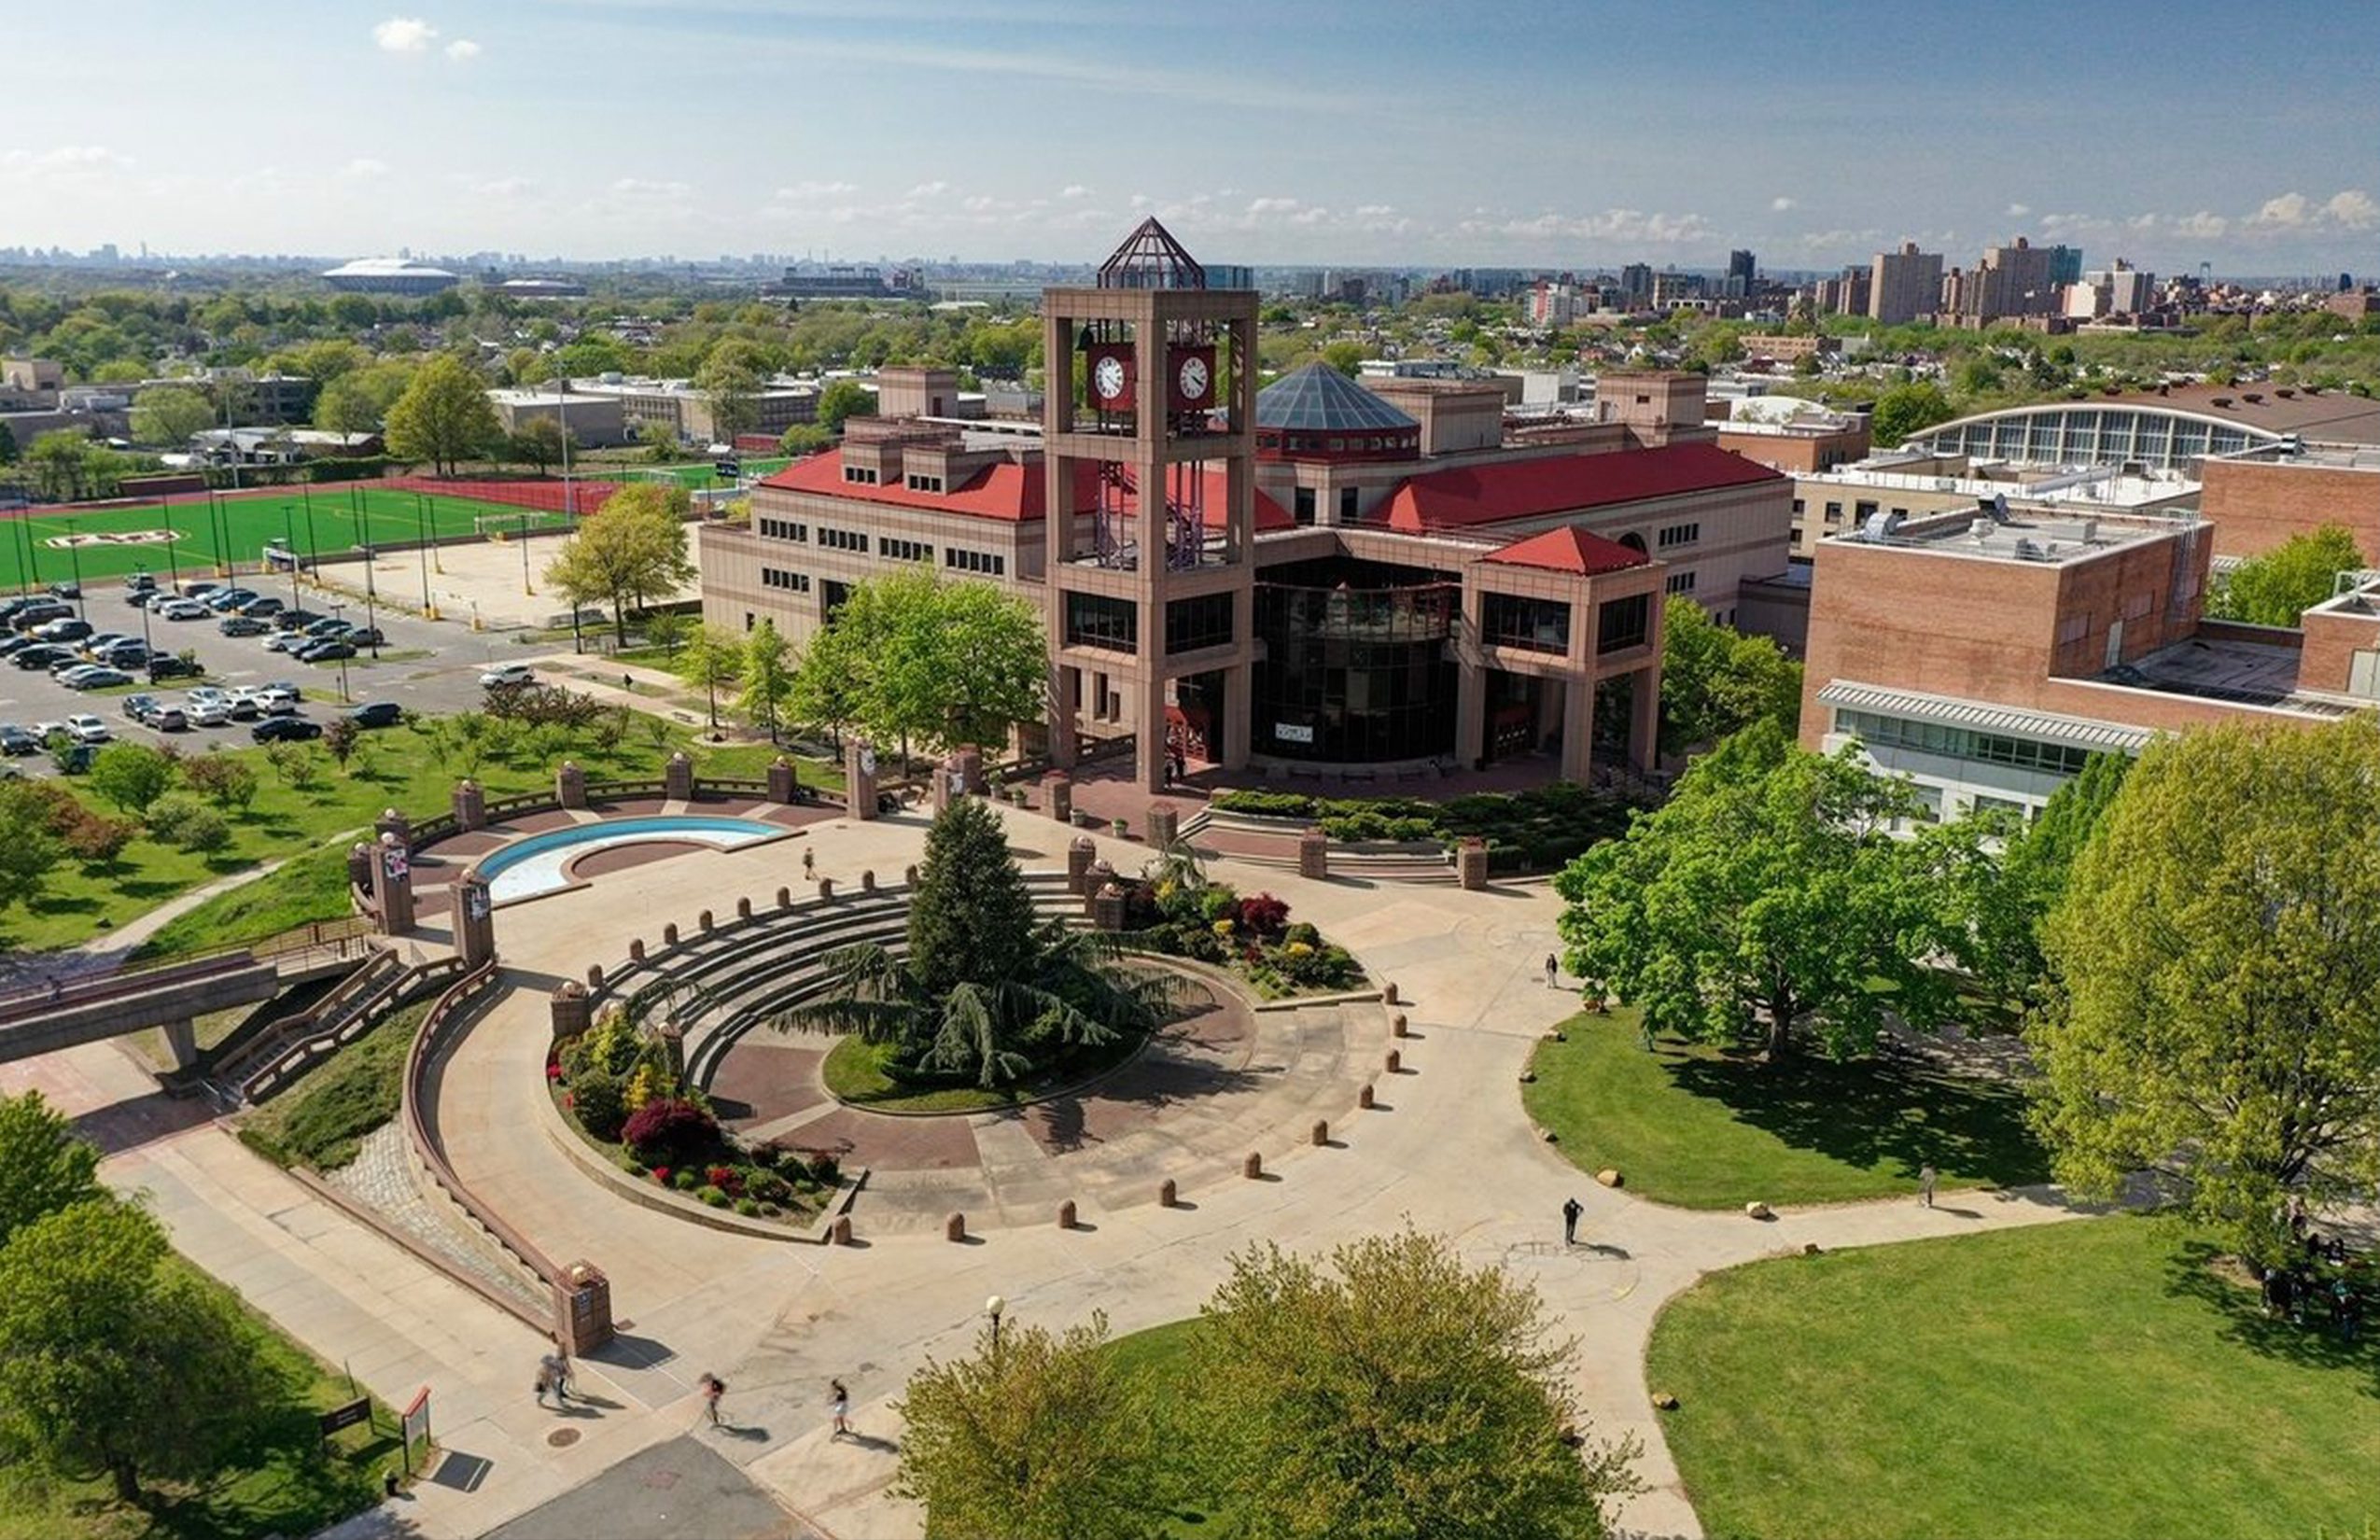 Visit Campus Bird's-eye view of the Benjamin S. Rosenthal Library